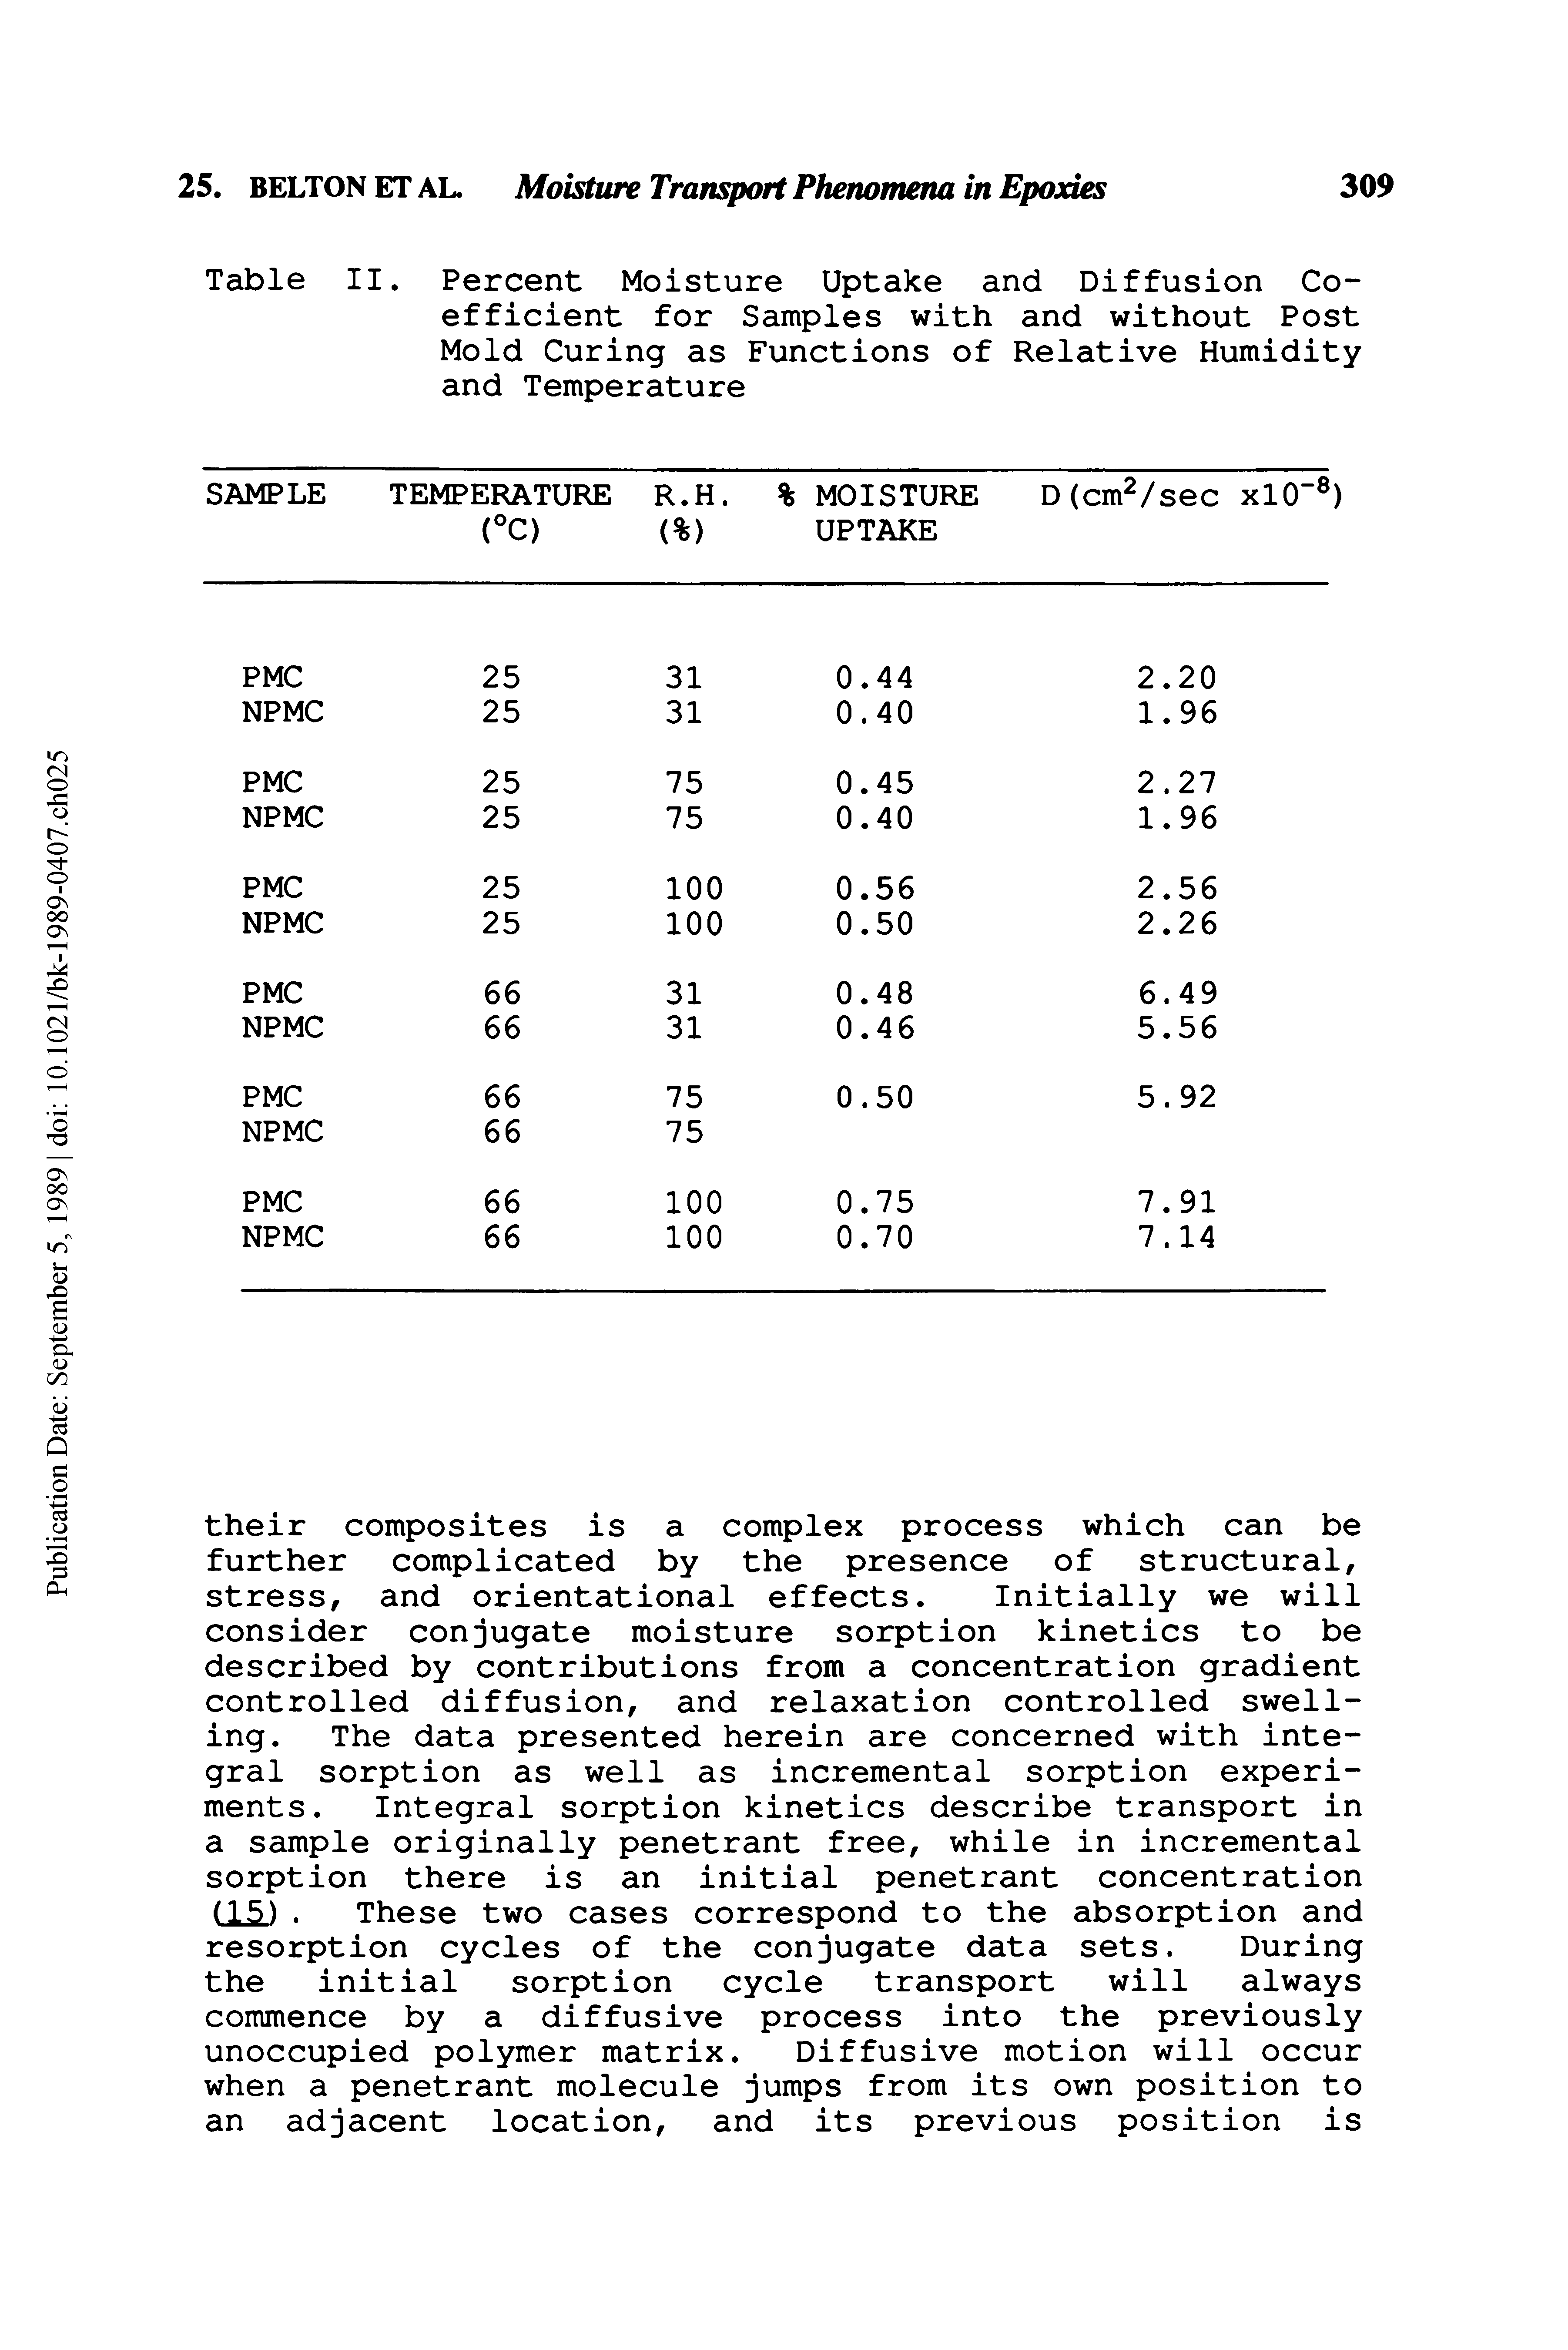 Table II. Percent Moisture Uptake and Diffusion Coefficient for Samples with and without Post Mold Curing as Functions of Relative Humidity and Temperature...